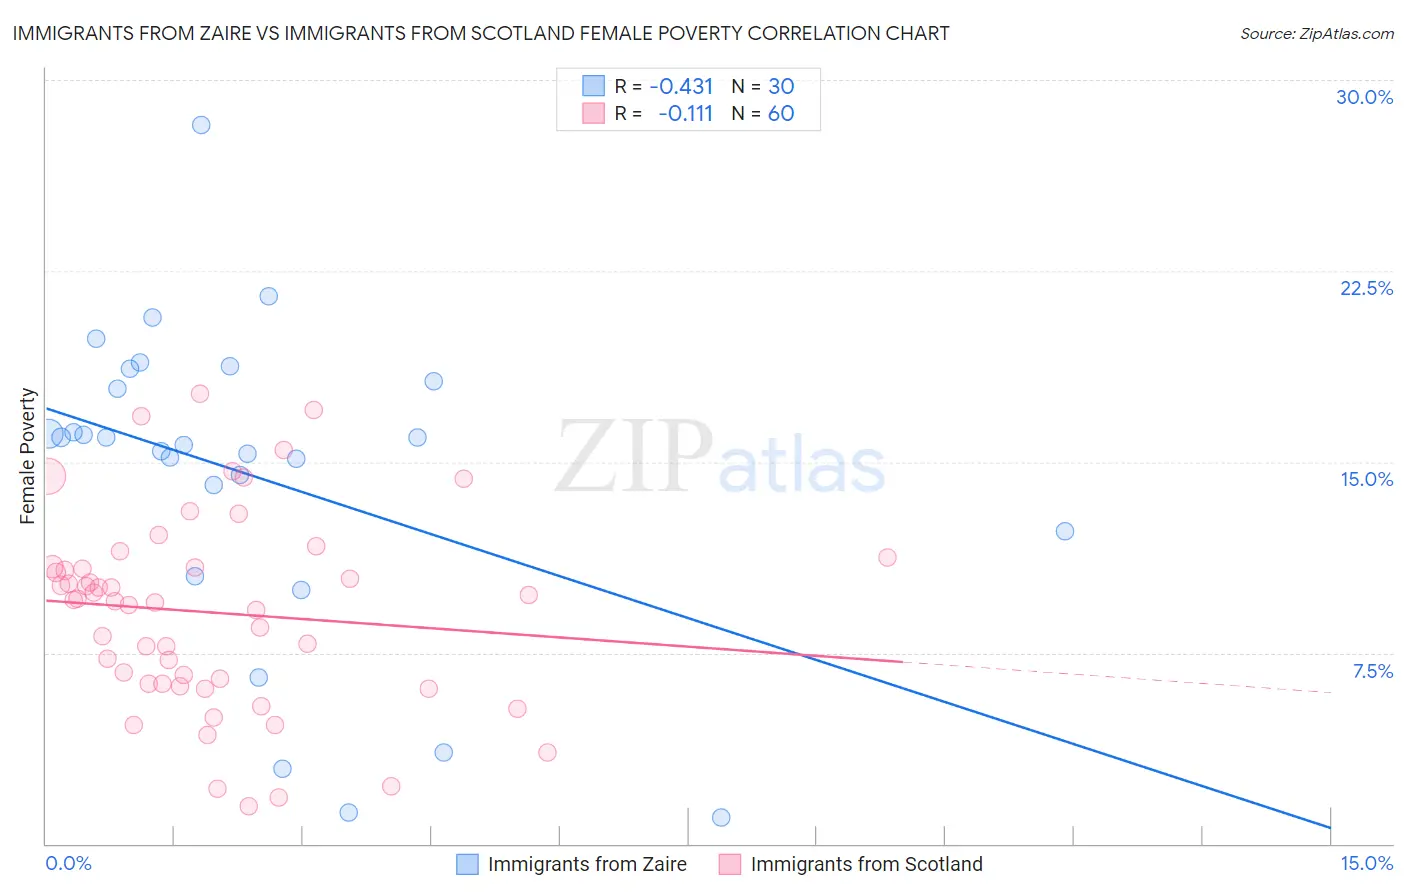 Immigrants from Zaire vs Immigrants from Scotland Female Poverty